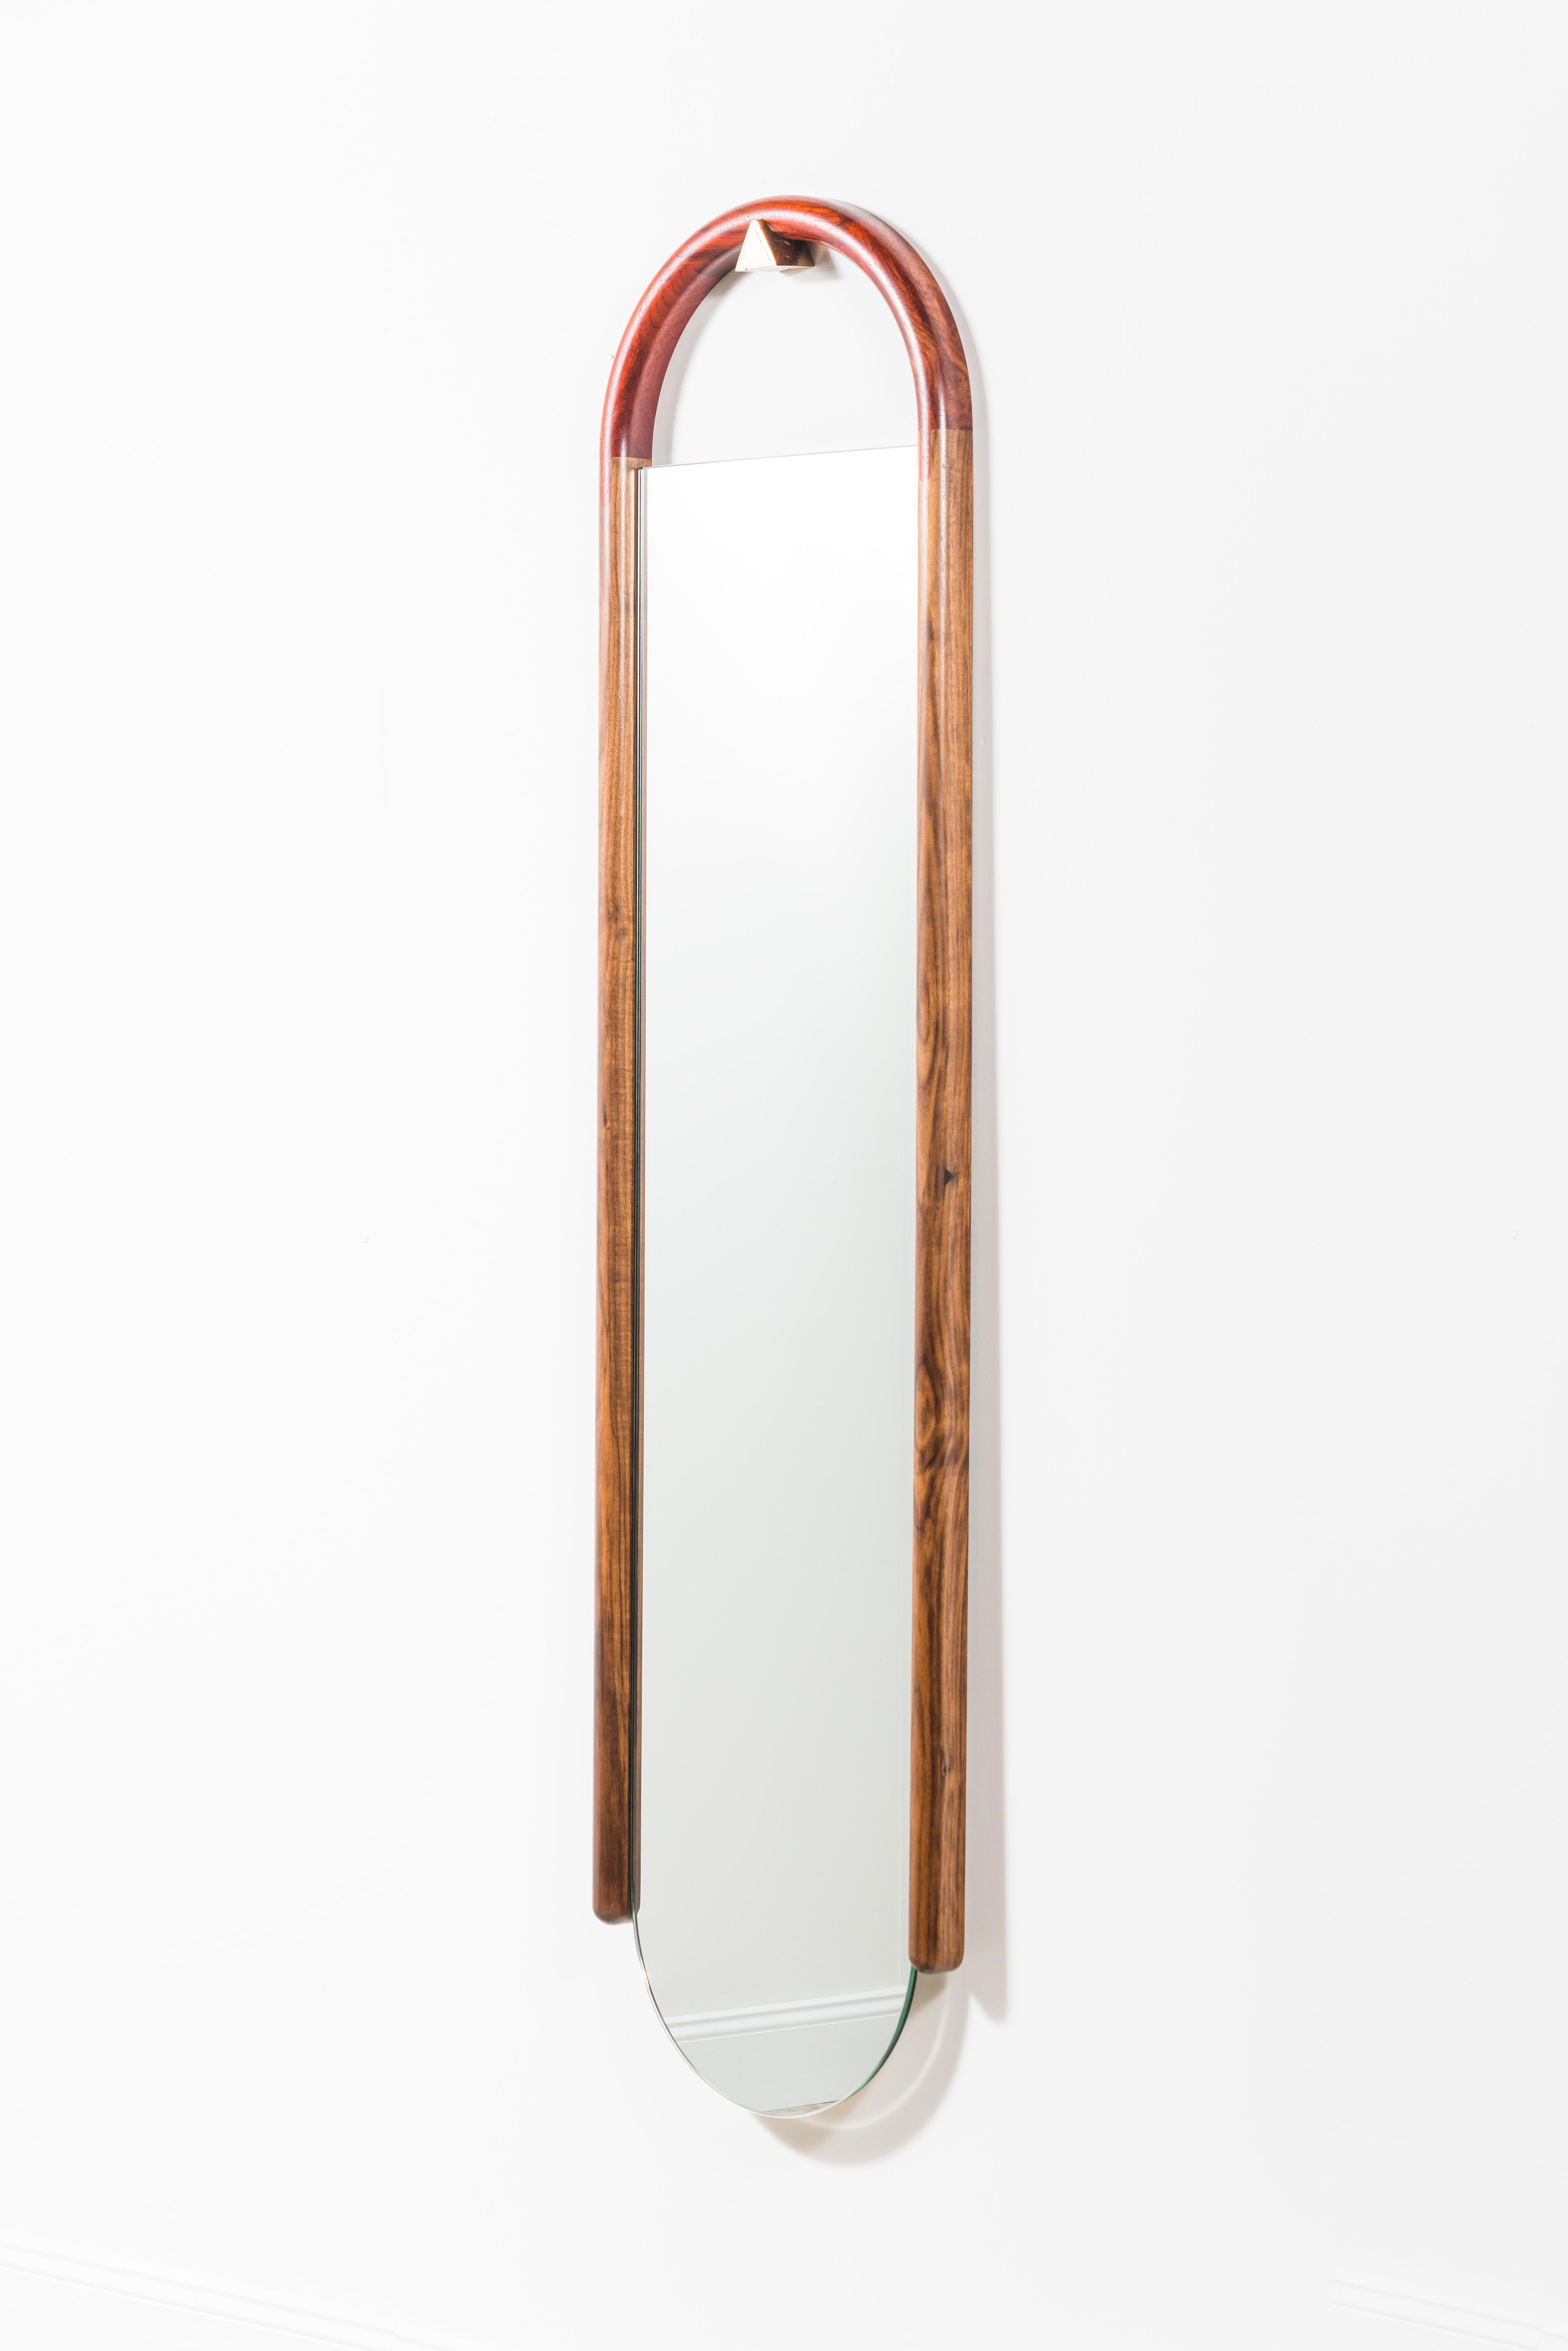 Halo Mirror in Padouk and Curly Maple, Wall Hanging Full Length Mirror 1